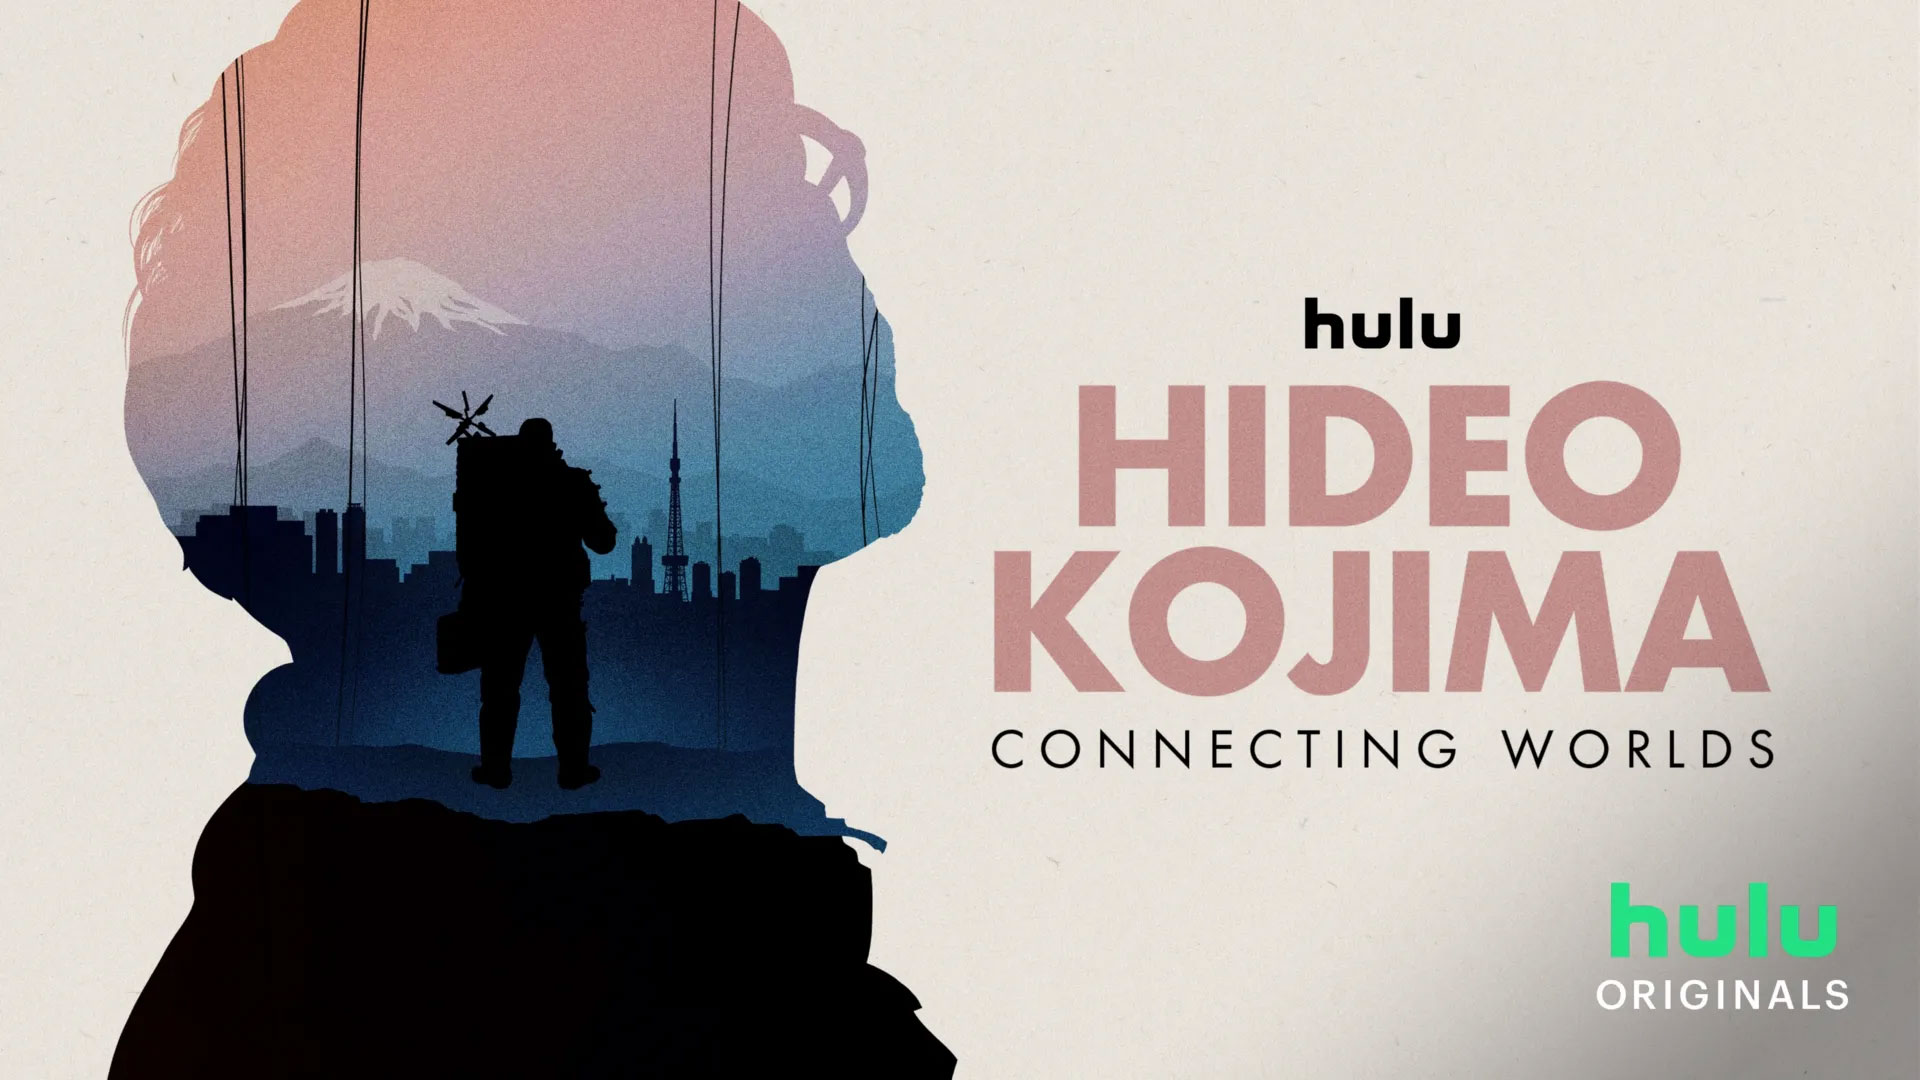 Hideo Kojima: Connecting Worlds is now available on Disney+ and Hulu